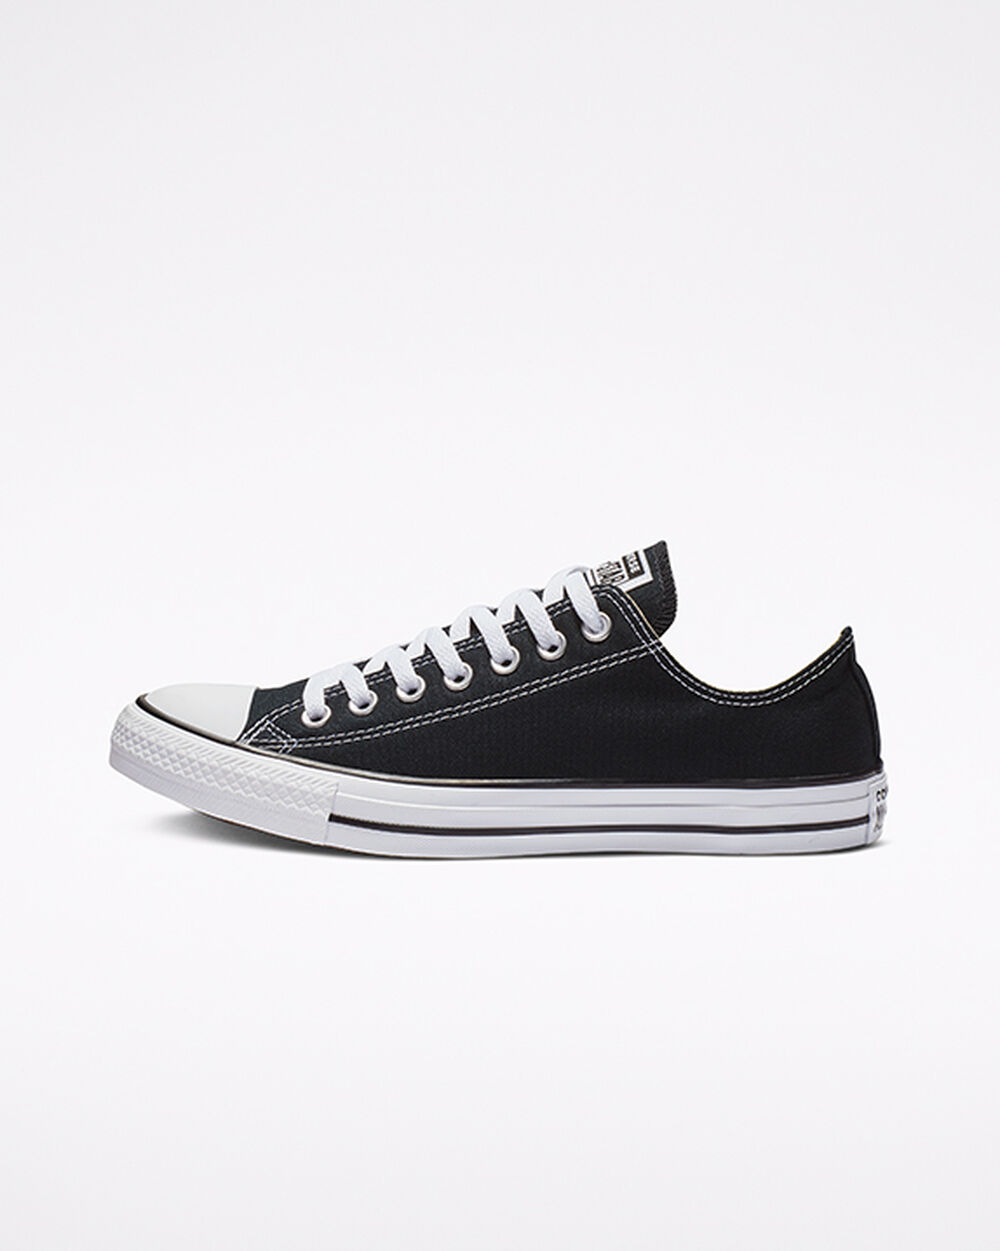 Tenis Converse Chuck Taylor All Star Mujer Negros | Mexico-452016